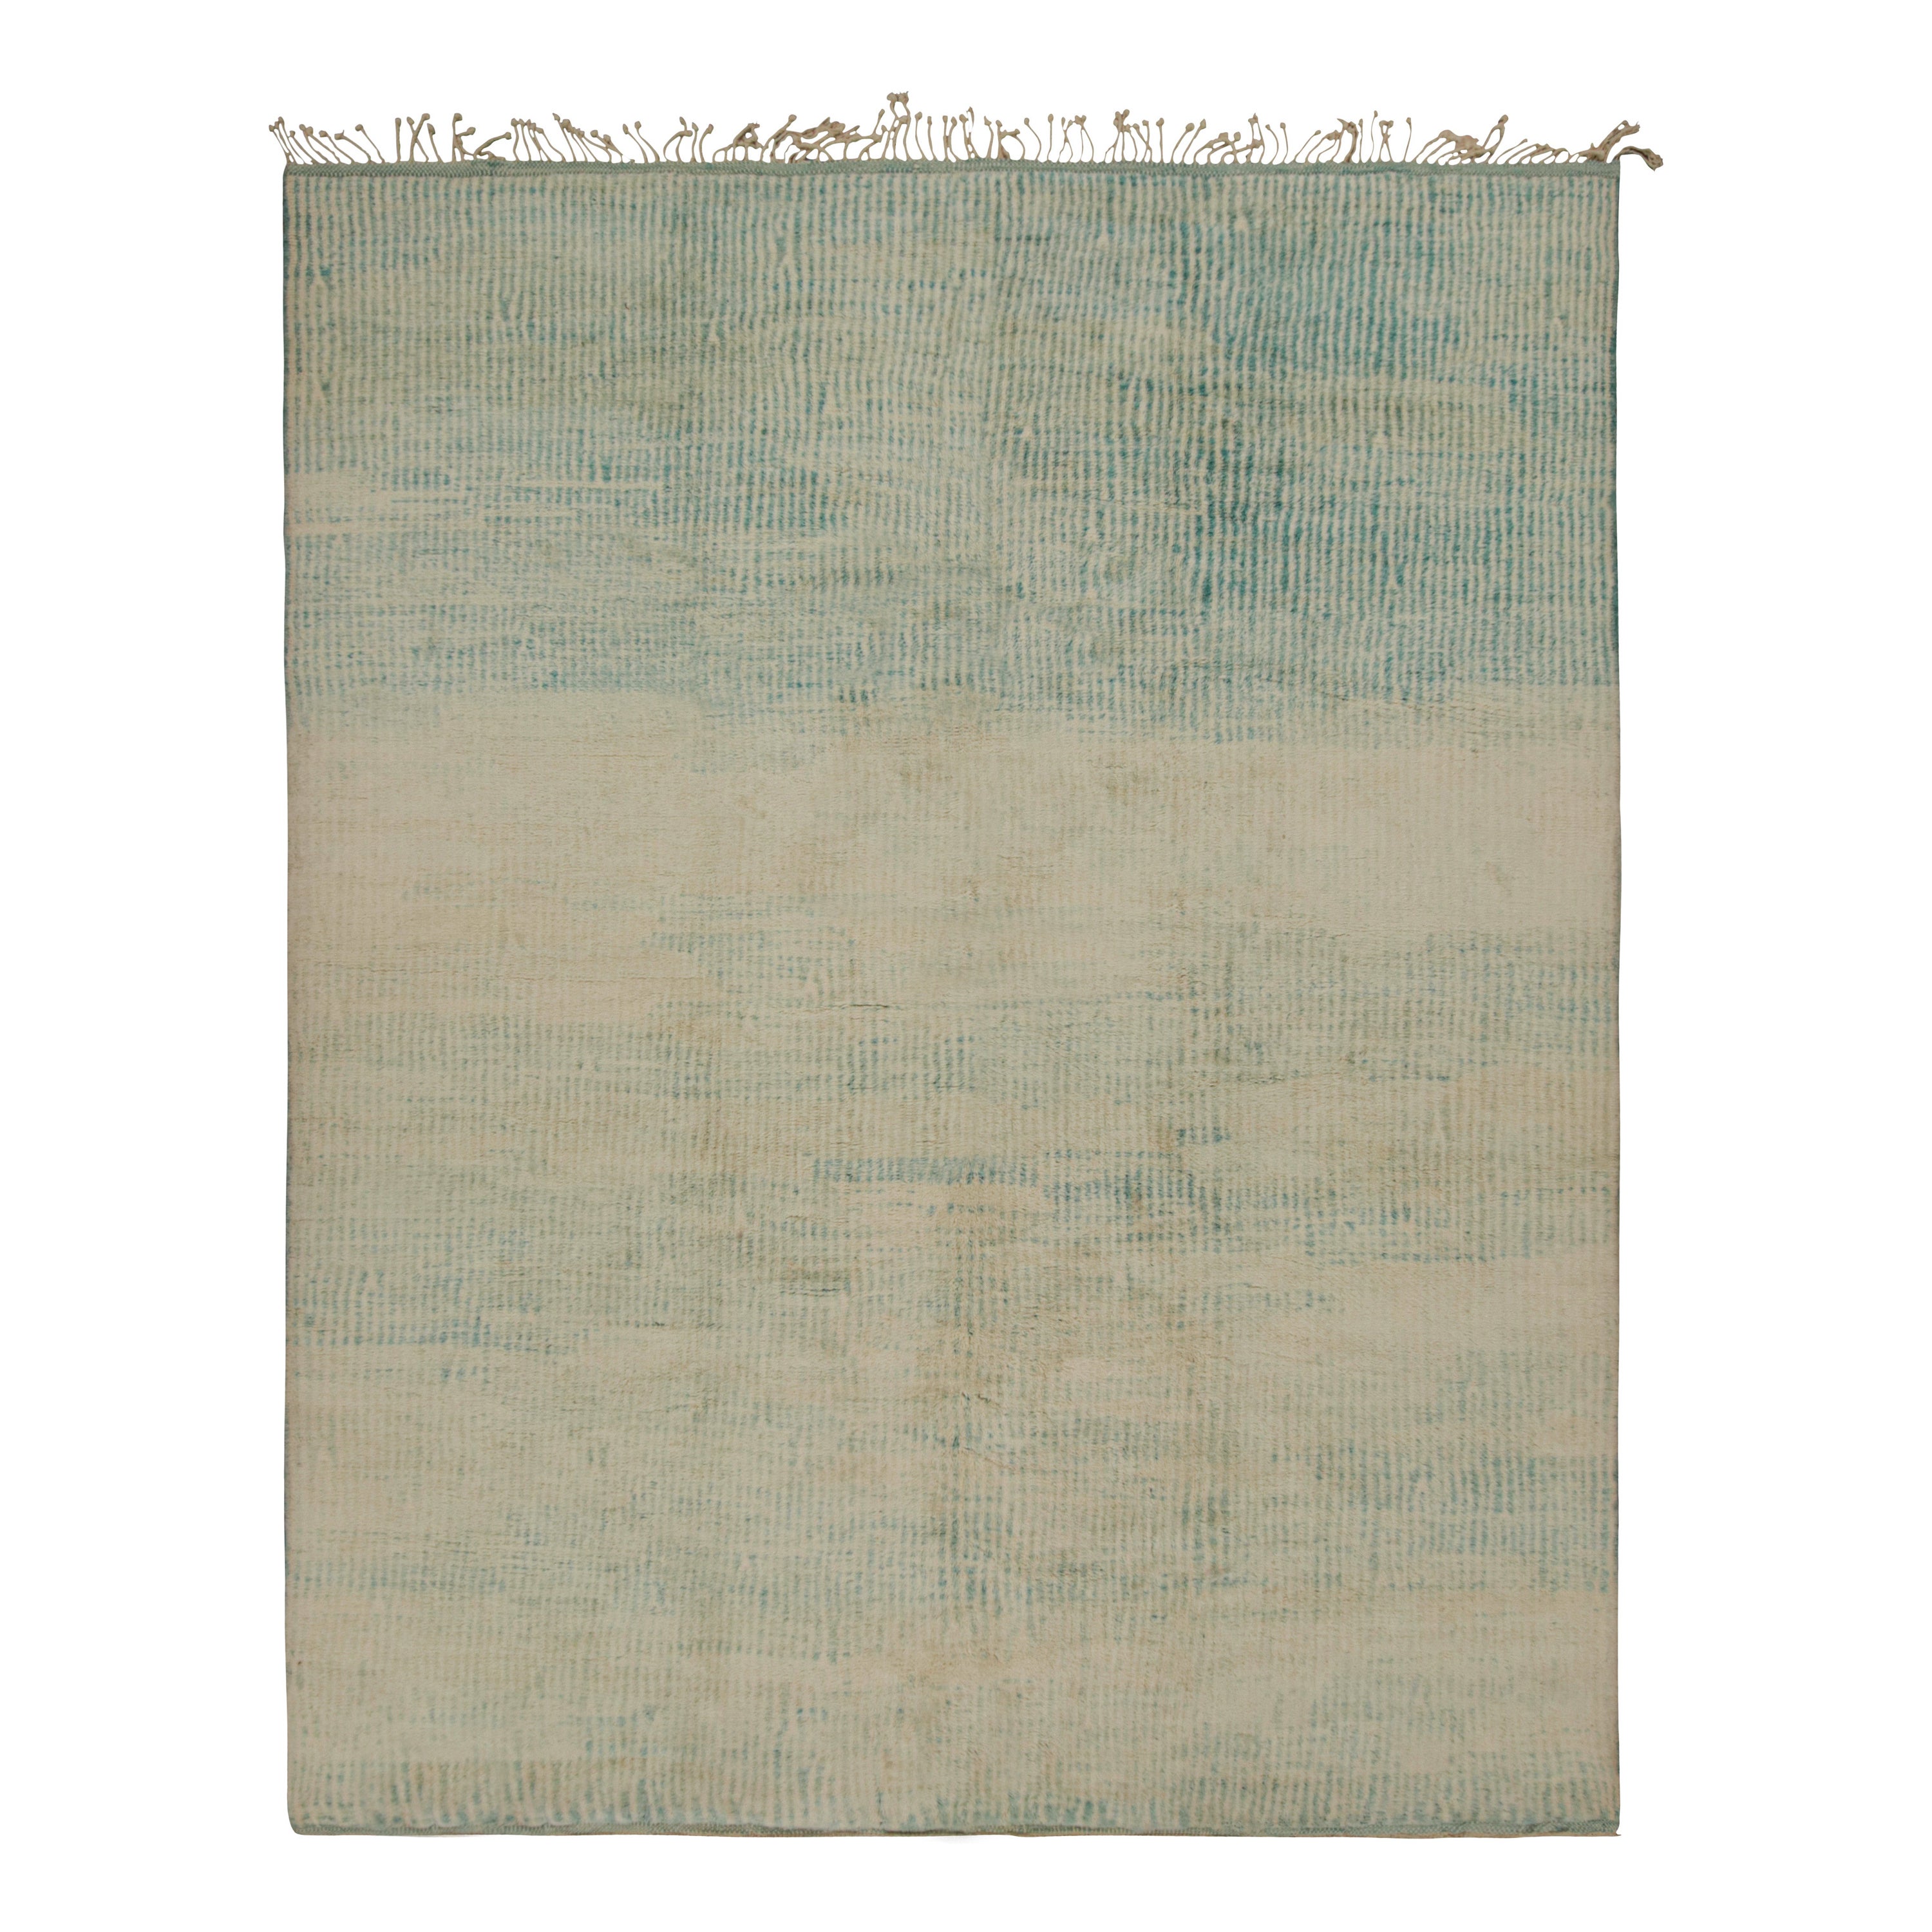 Rug & Kilim’s Moroccan Rug with Beige and Light Blue Stripes in Lush Pile For Sale